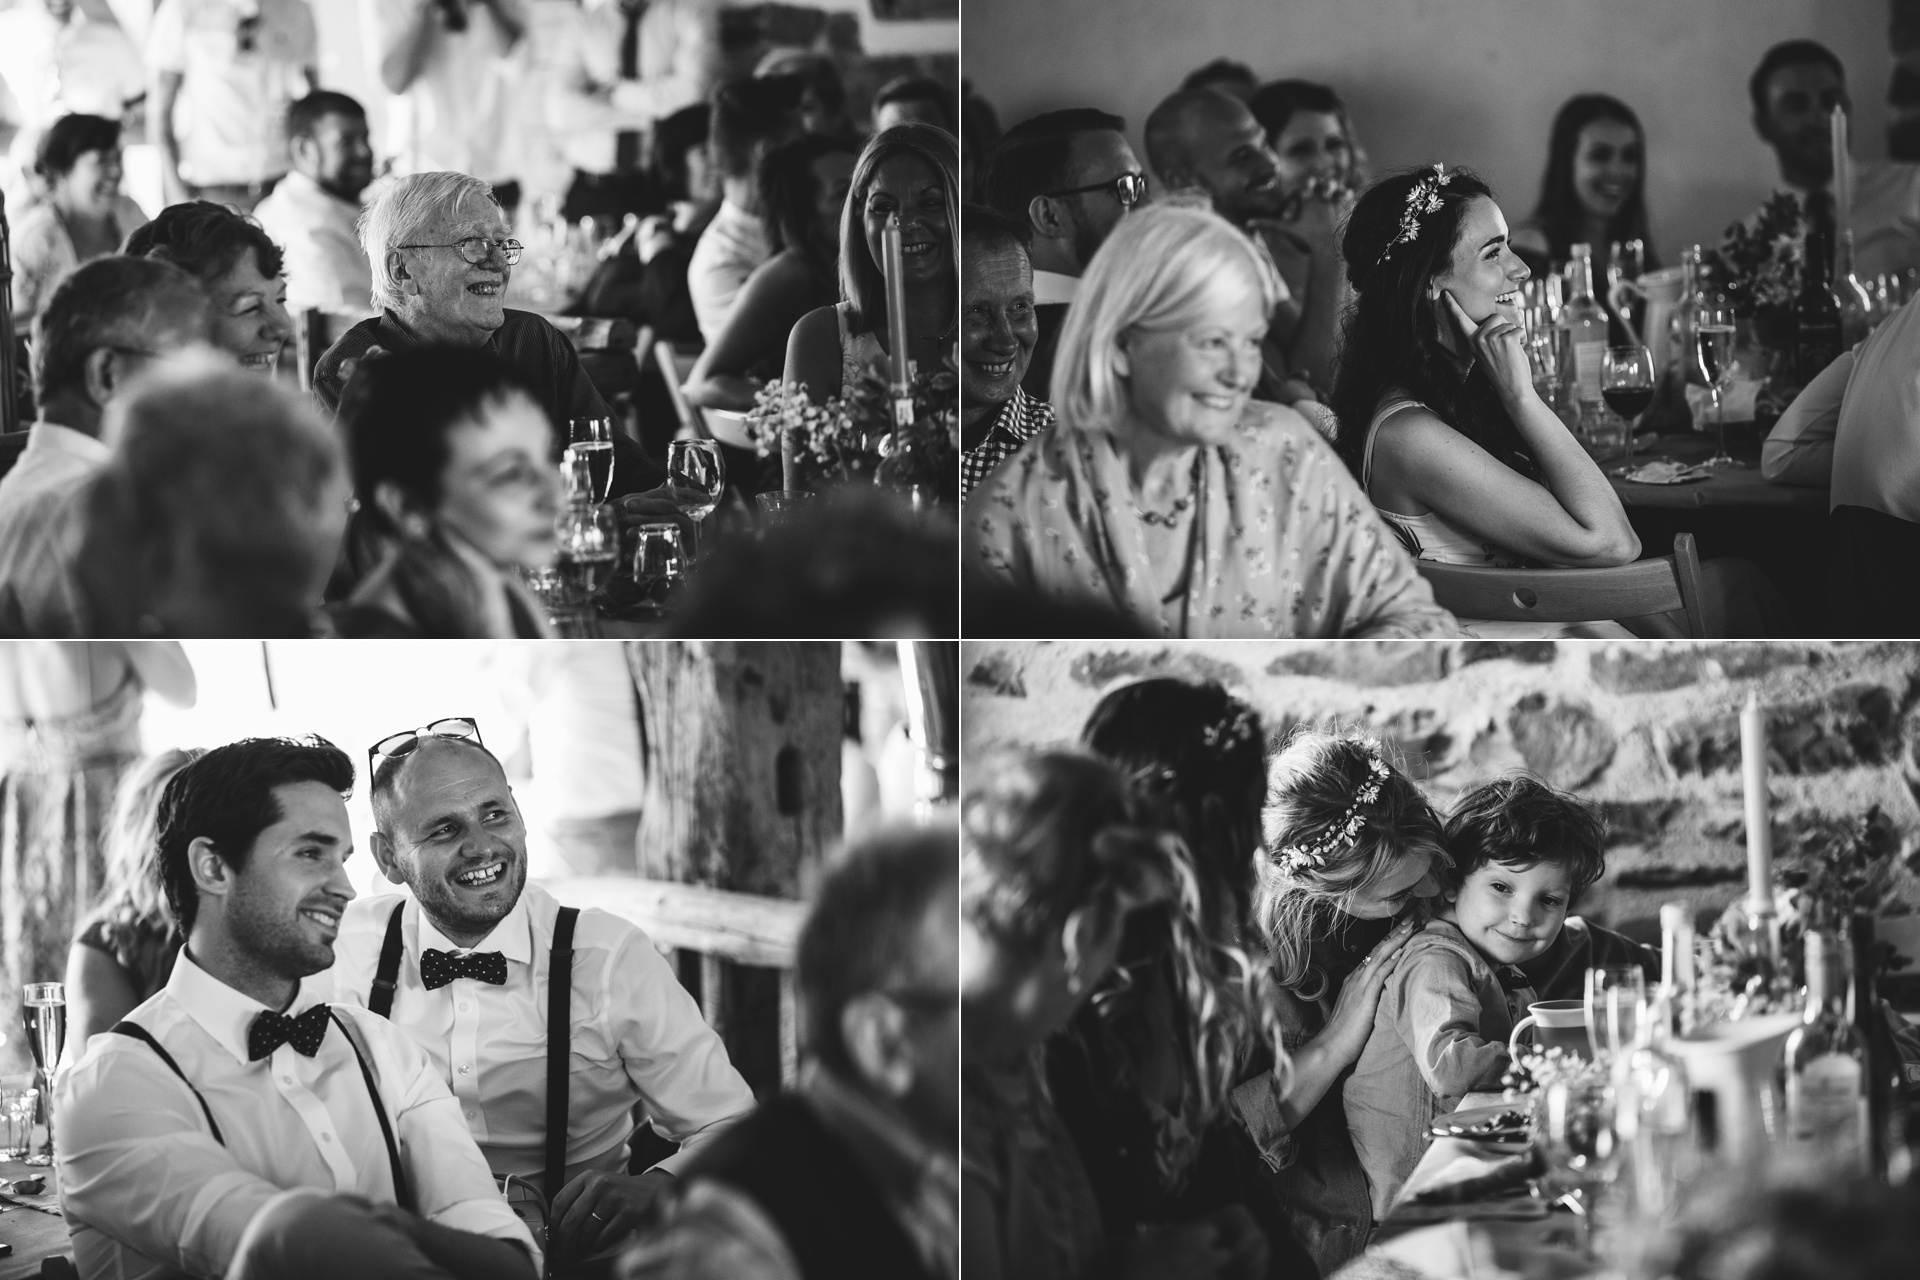 Wedding guests laughing during meal